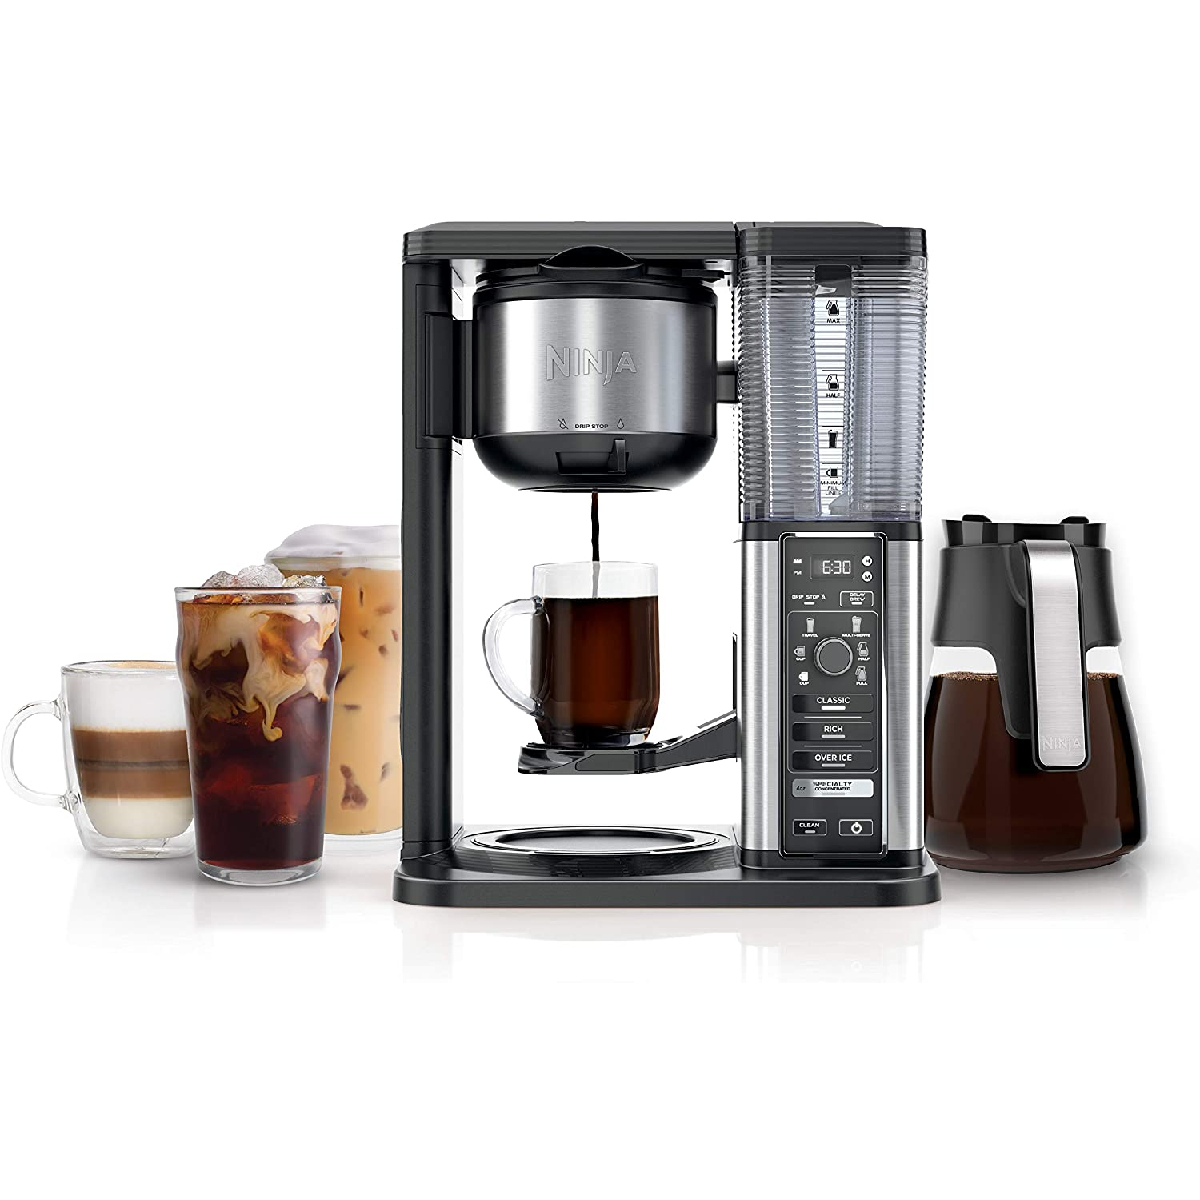 The Ninja CM401 Specialty 10-Cup Coffee Maker